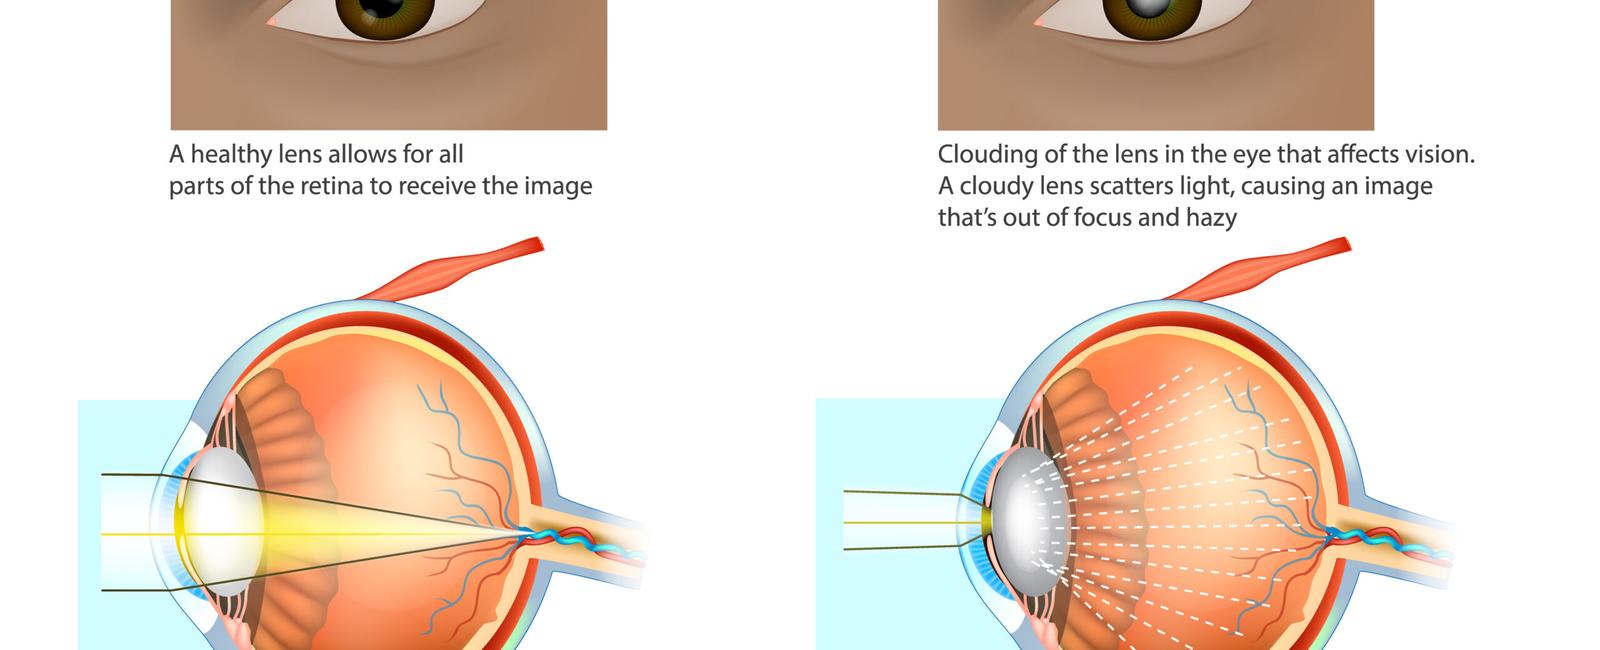 Sometimes the crystalline lenses of elderly people become milky and cloudy this is called a cataract and it causes partial or complete loss of vision